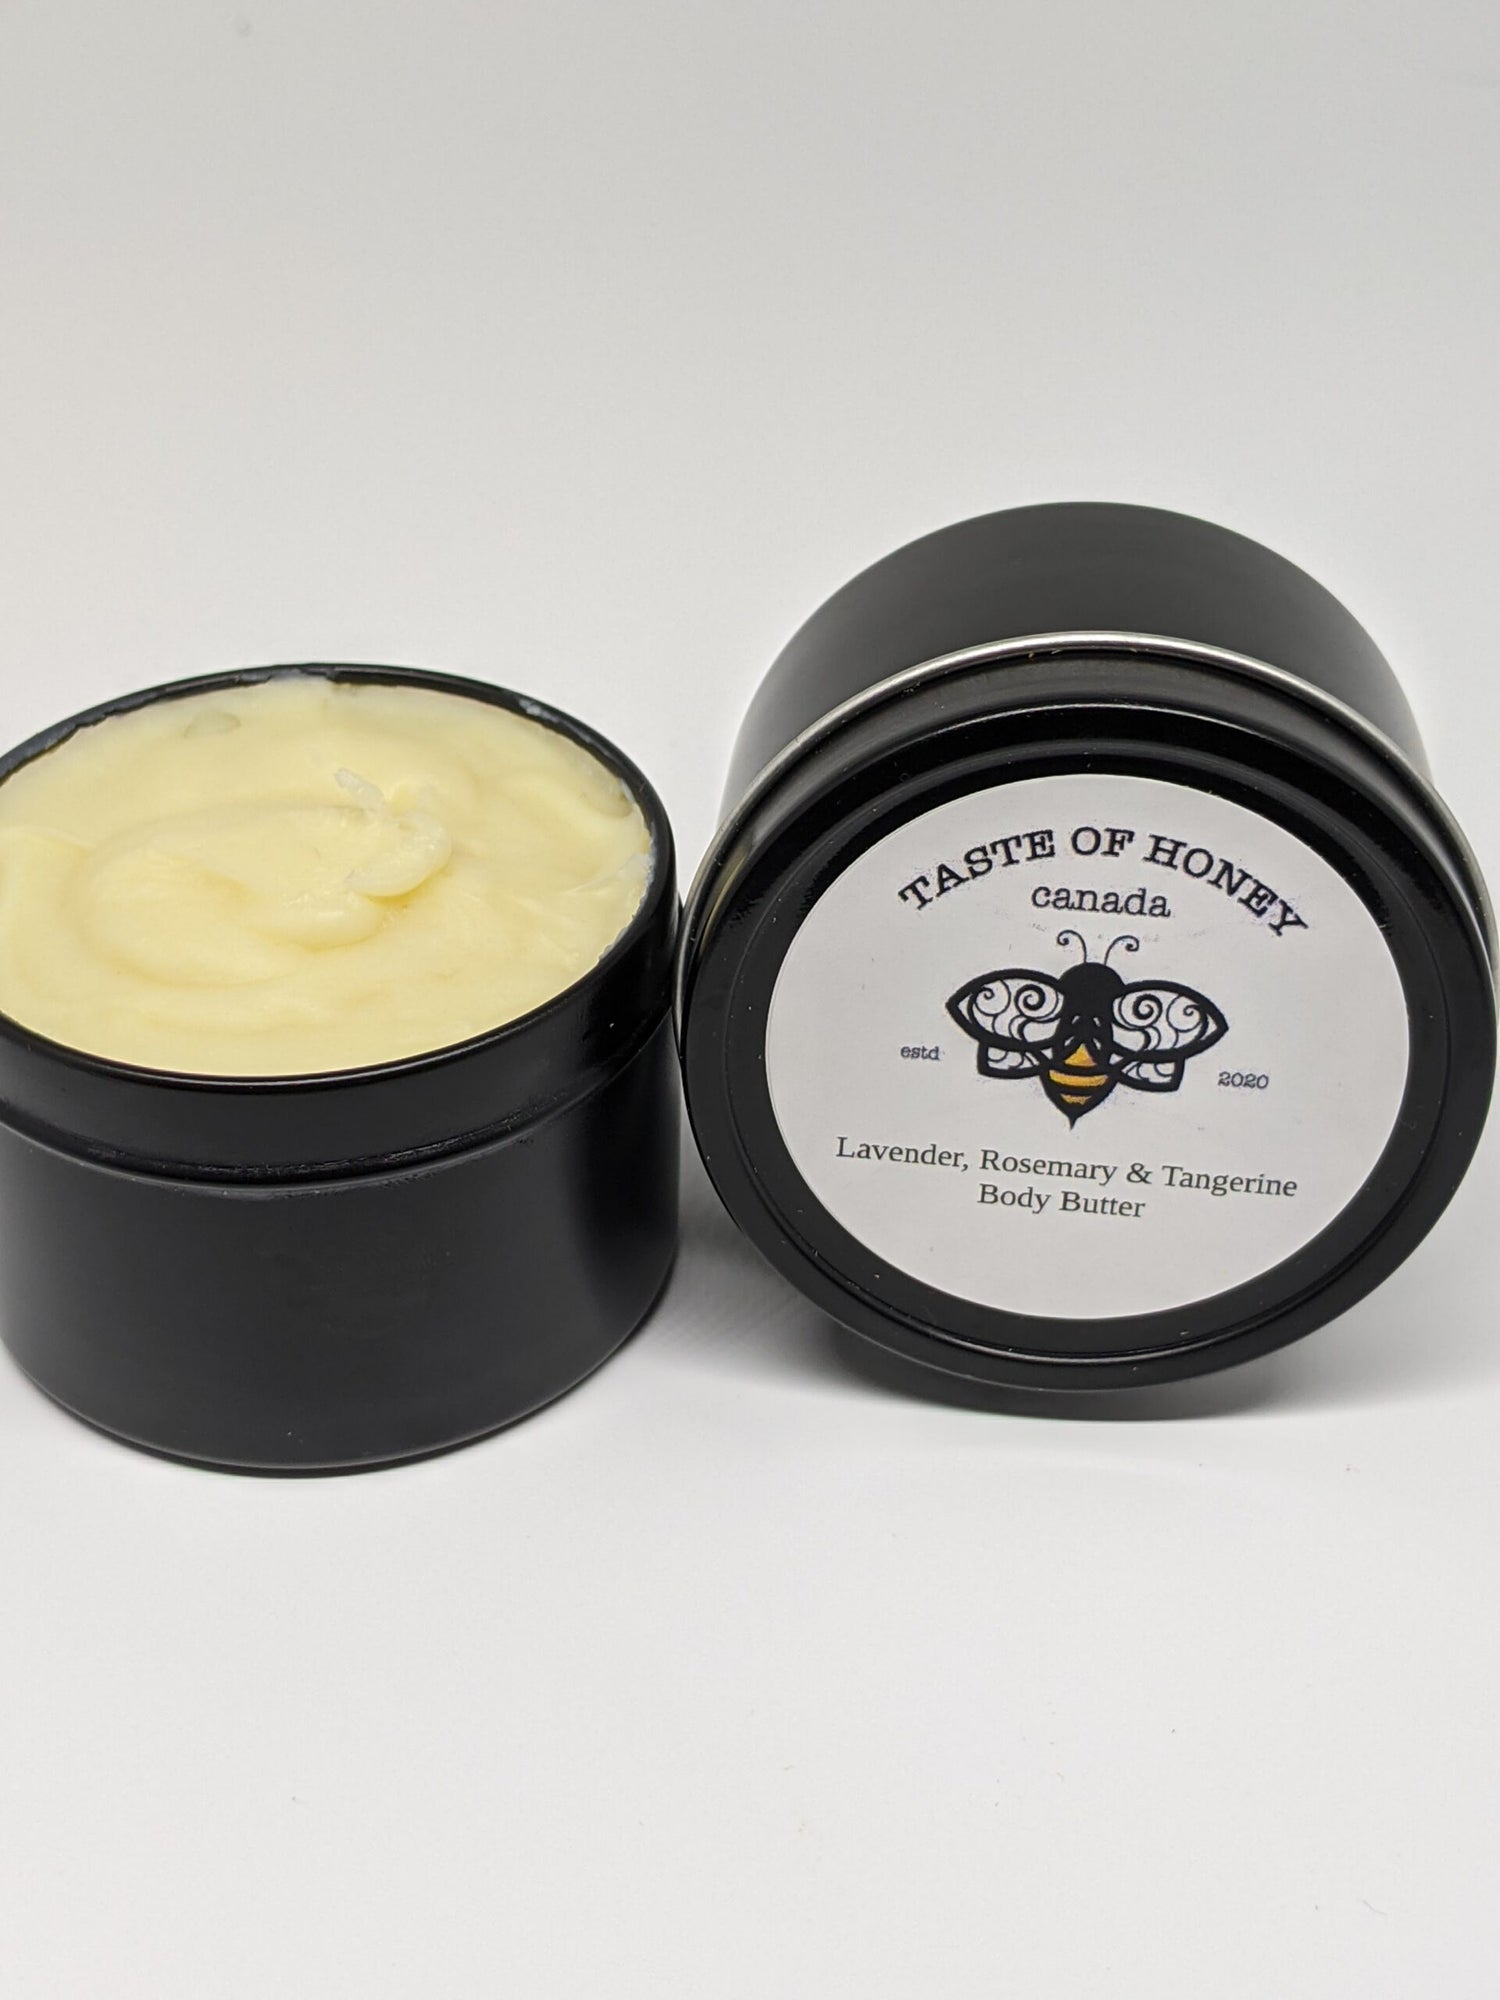 Lavender, Rosemary & Tangerine body butter.  Black tin, white label with bee logo.  Product color creamy yellow